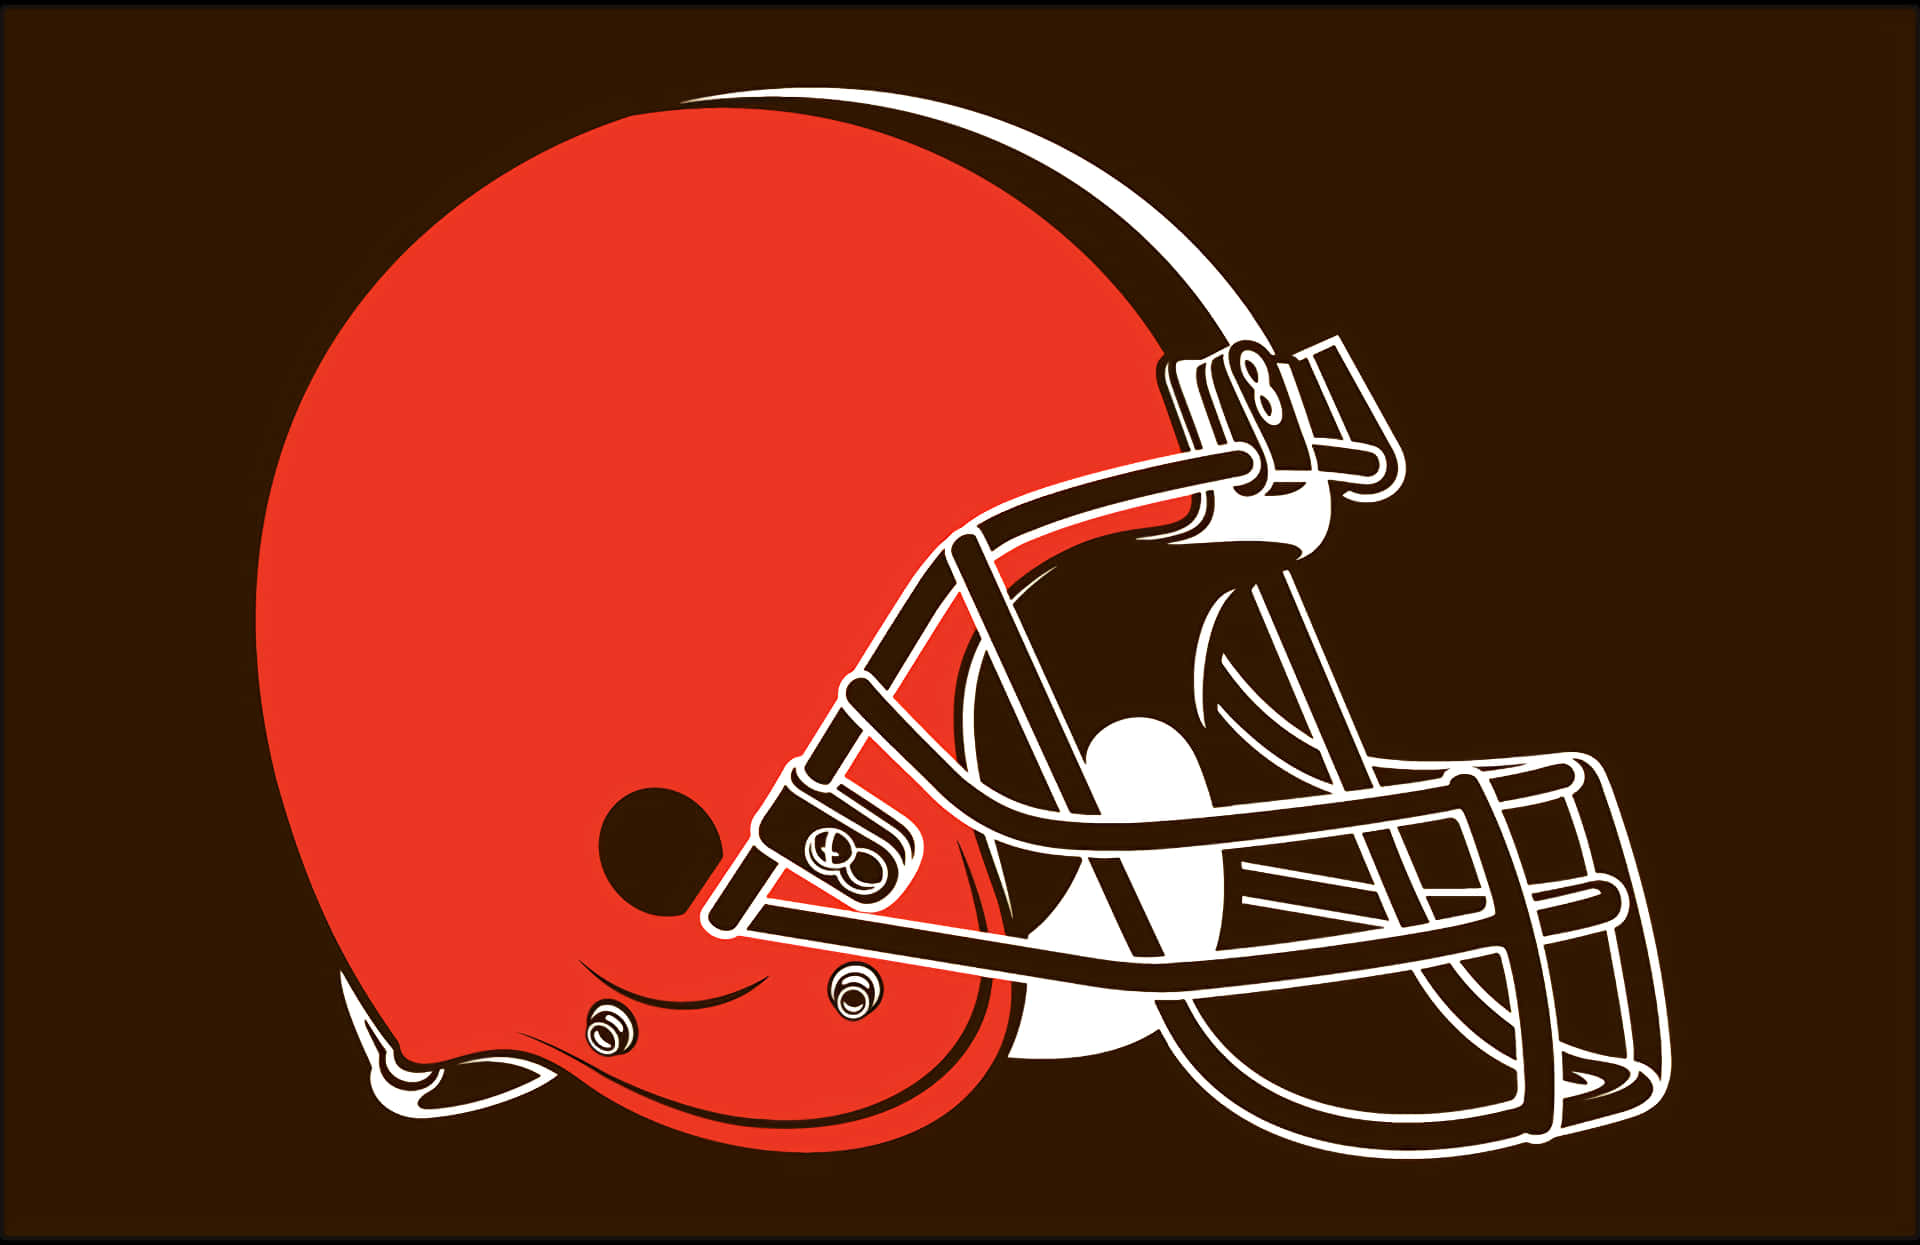 Proud logo of the Cleveland Browns Wallpaper